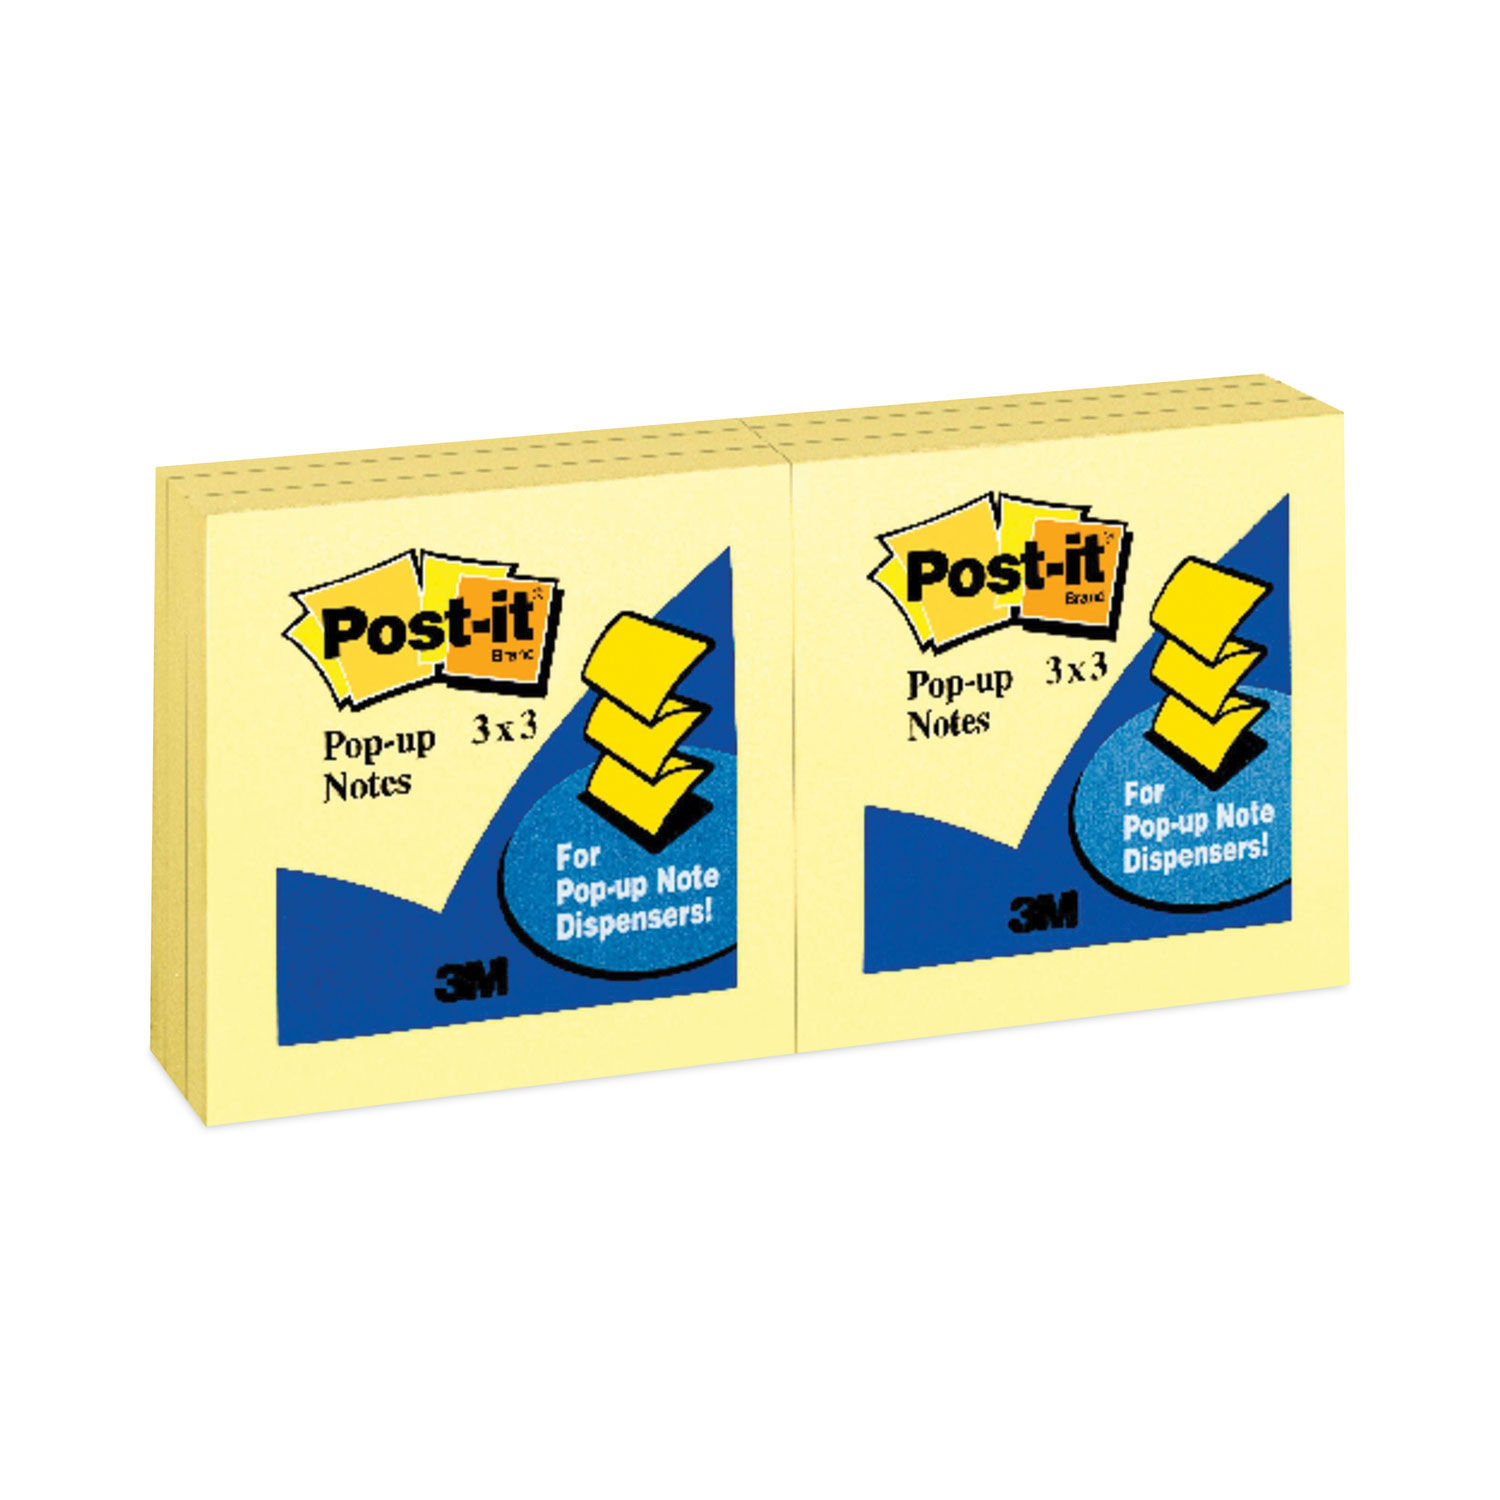 Original Canary Yellow Pop-up Refill by Post-itandreg; Pop-up Notes MMMR330YW